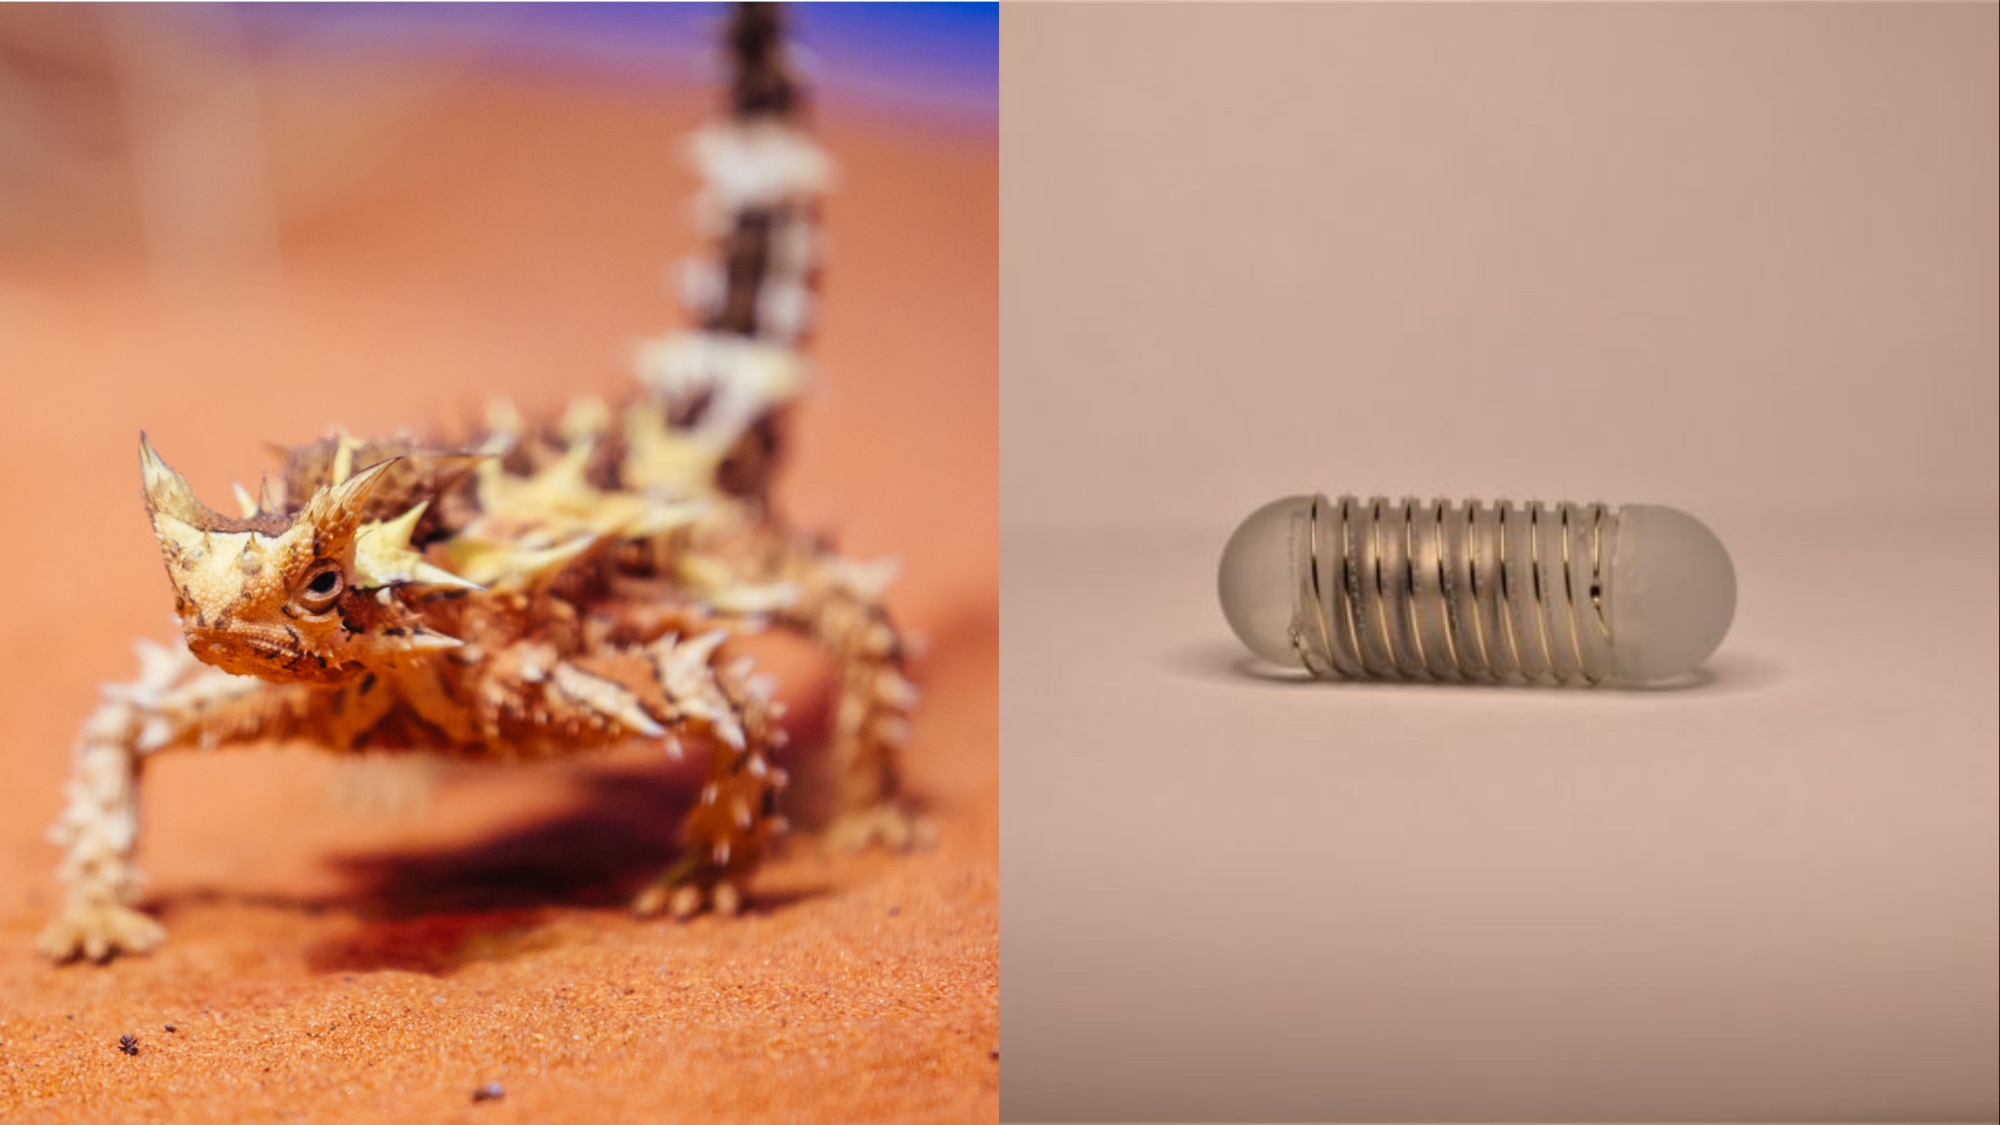 A cutting-edge appetite stimulator was inspired by the thorny devil lizard